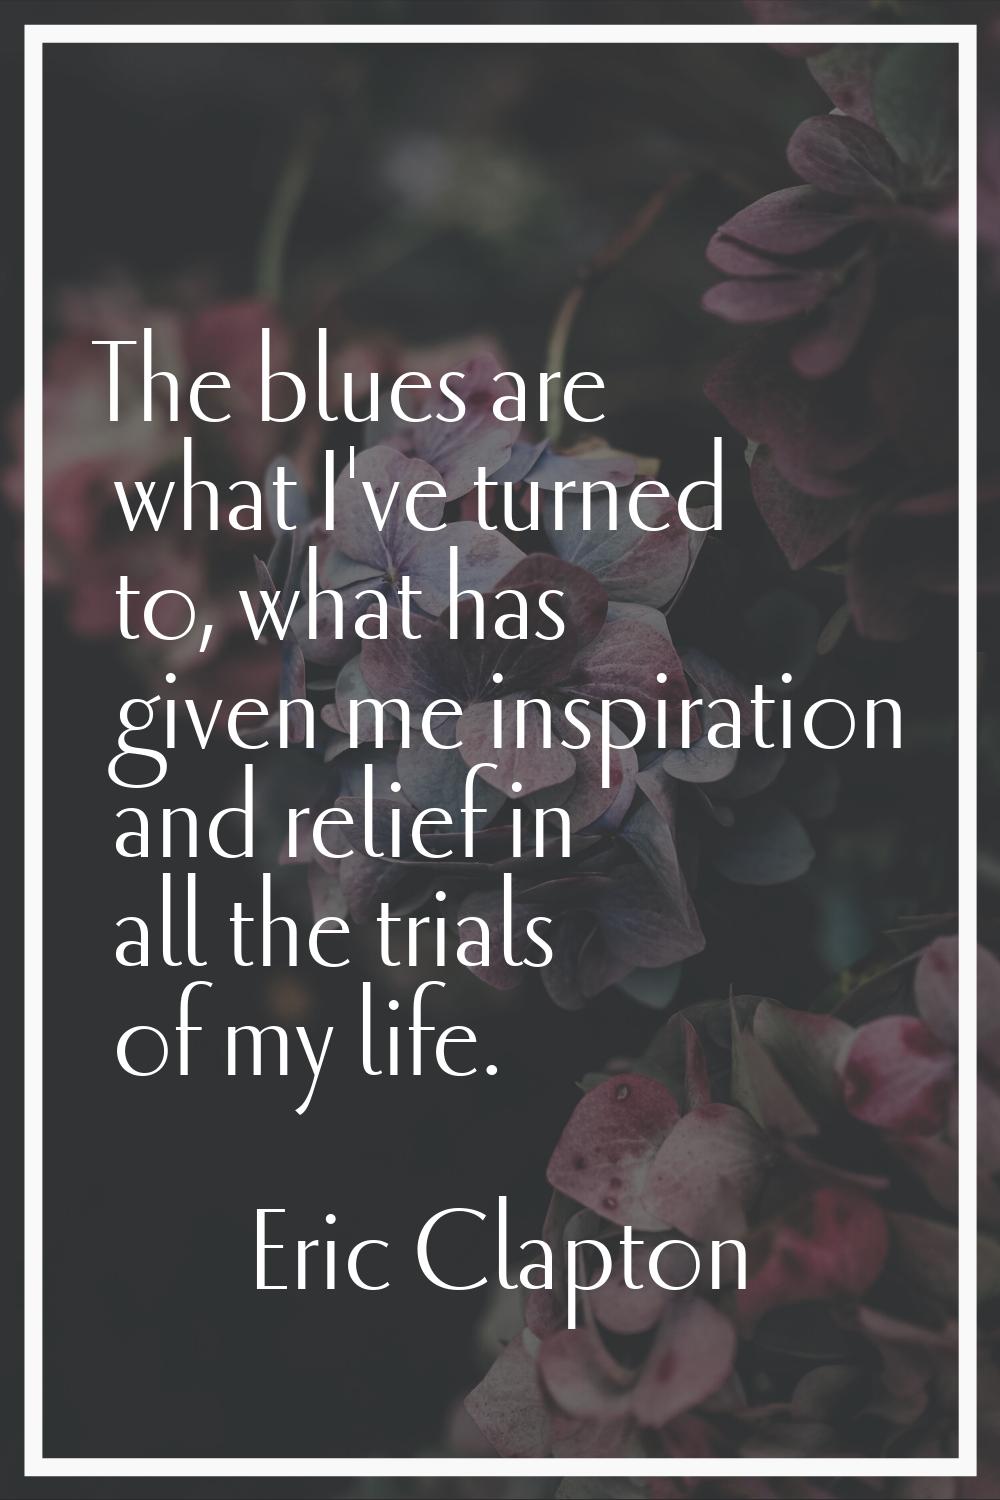 The blues are what I've turned to, what has given me inspiration and relief in all the trials of my